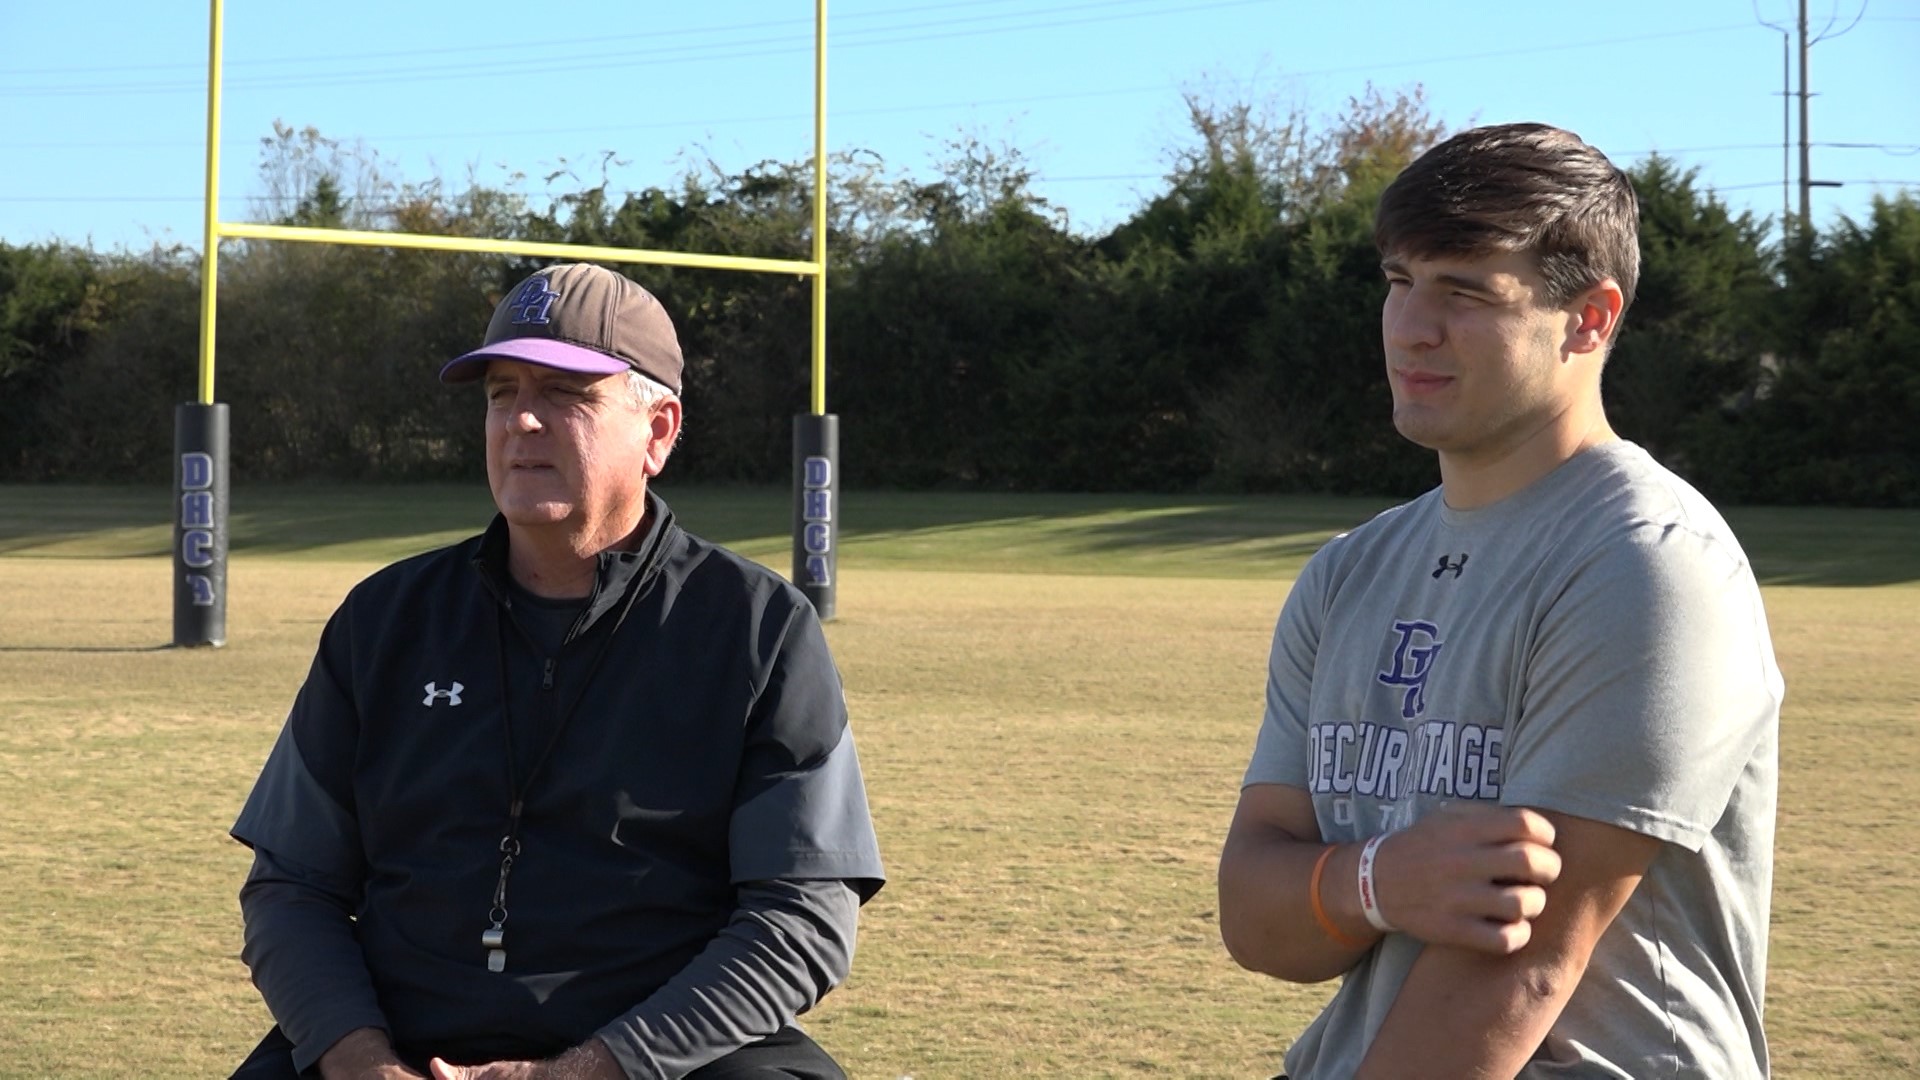 FOX54's Jonah Karp sat down with Kyle and Eagles Head Coach Steve Meek to reflect on this record-setting performance.